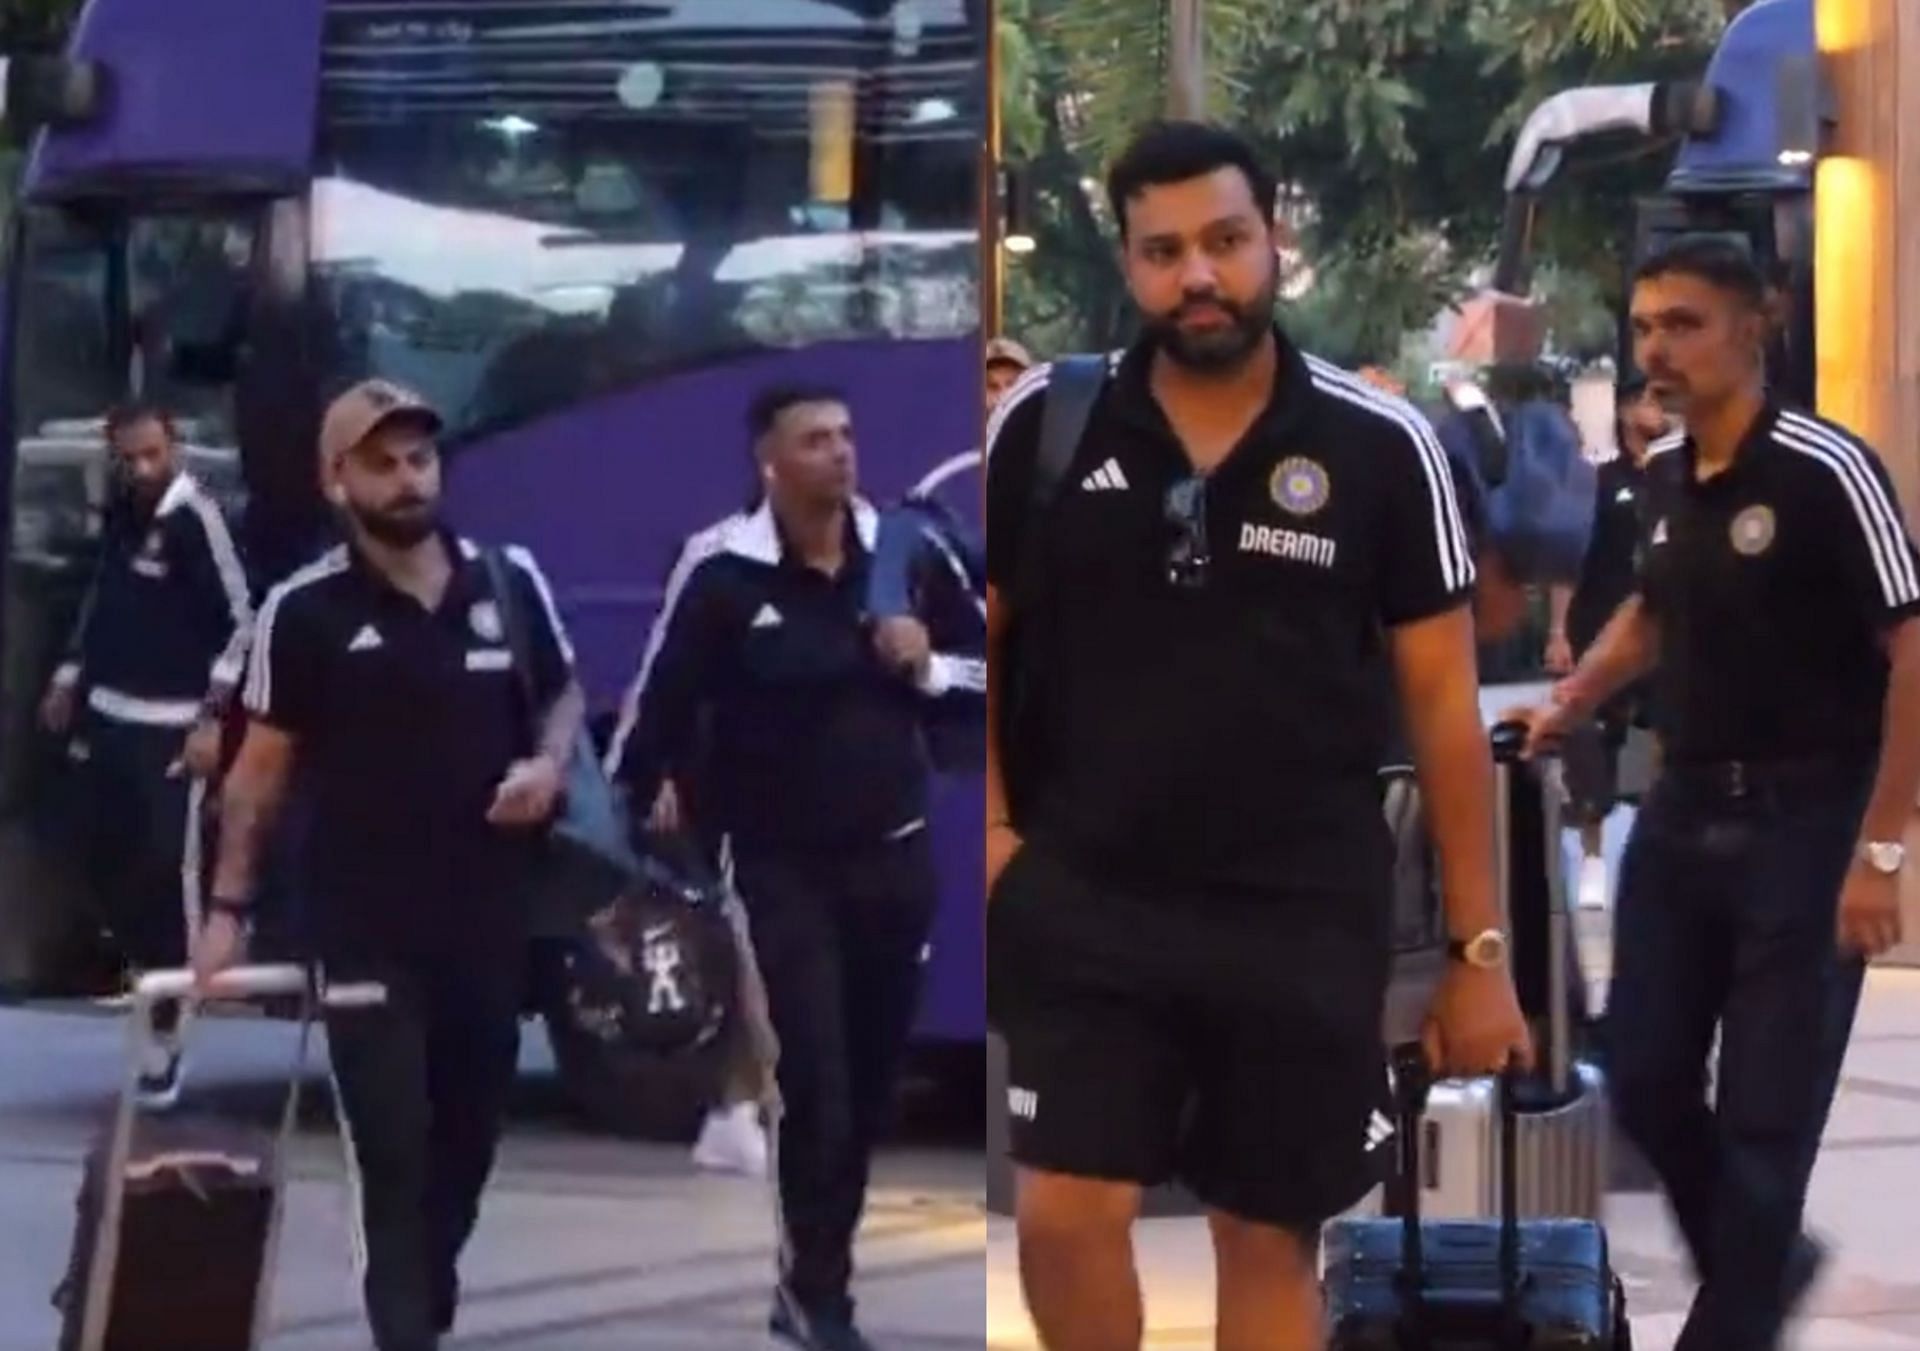 [Watch] Team India players arrive in Guwahati ahead of their World Cup warm-up match against England